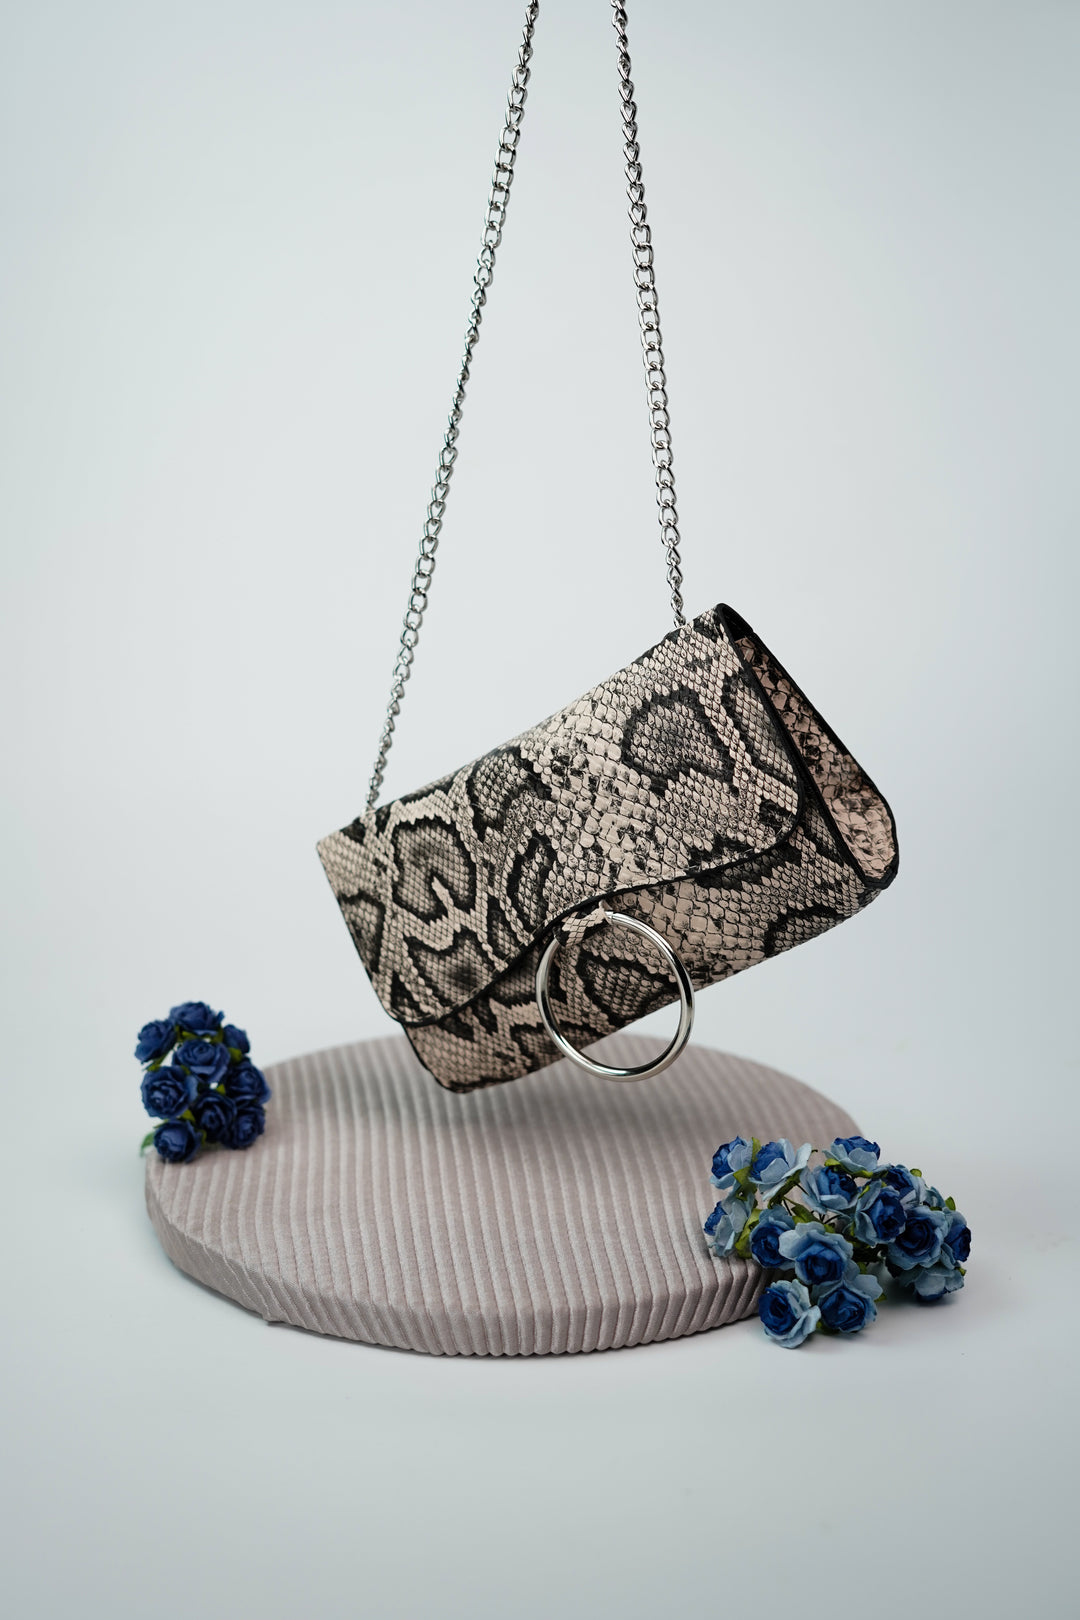 Modern Reptile Print Belt Bag Accessory with a Blend of Style and Functionality